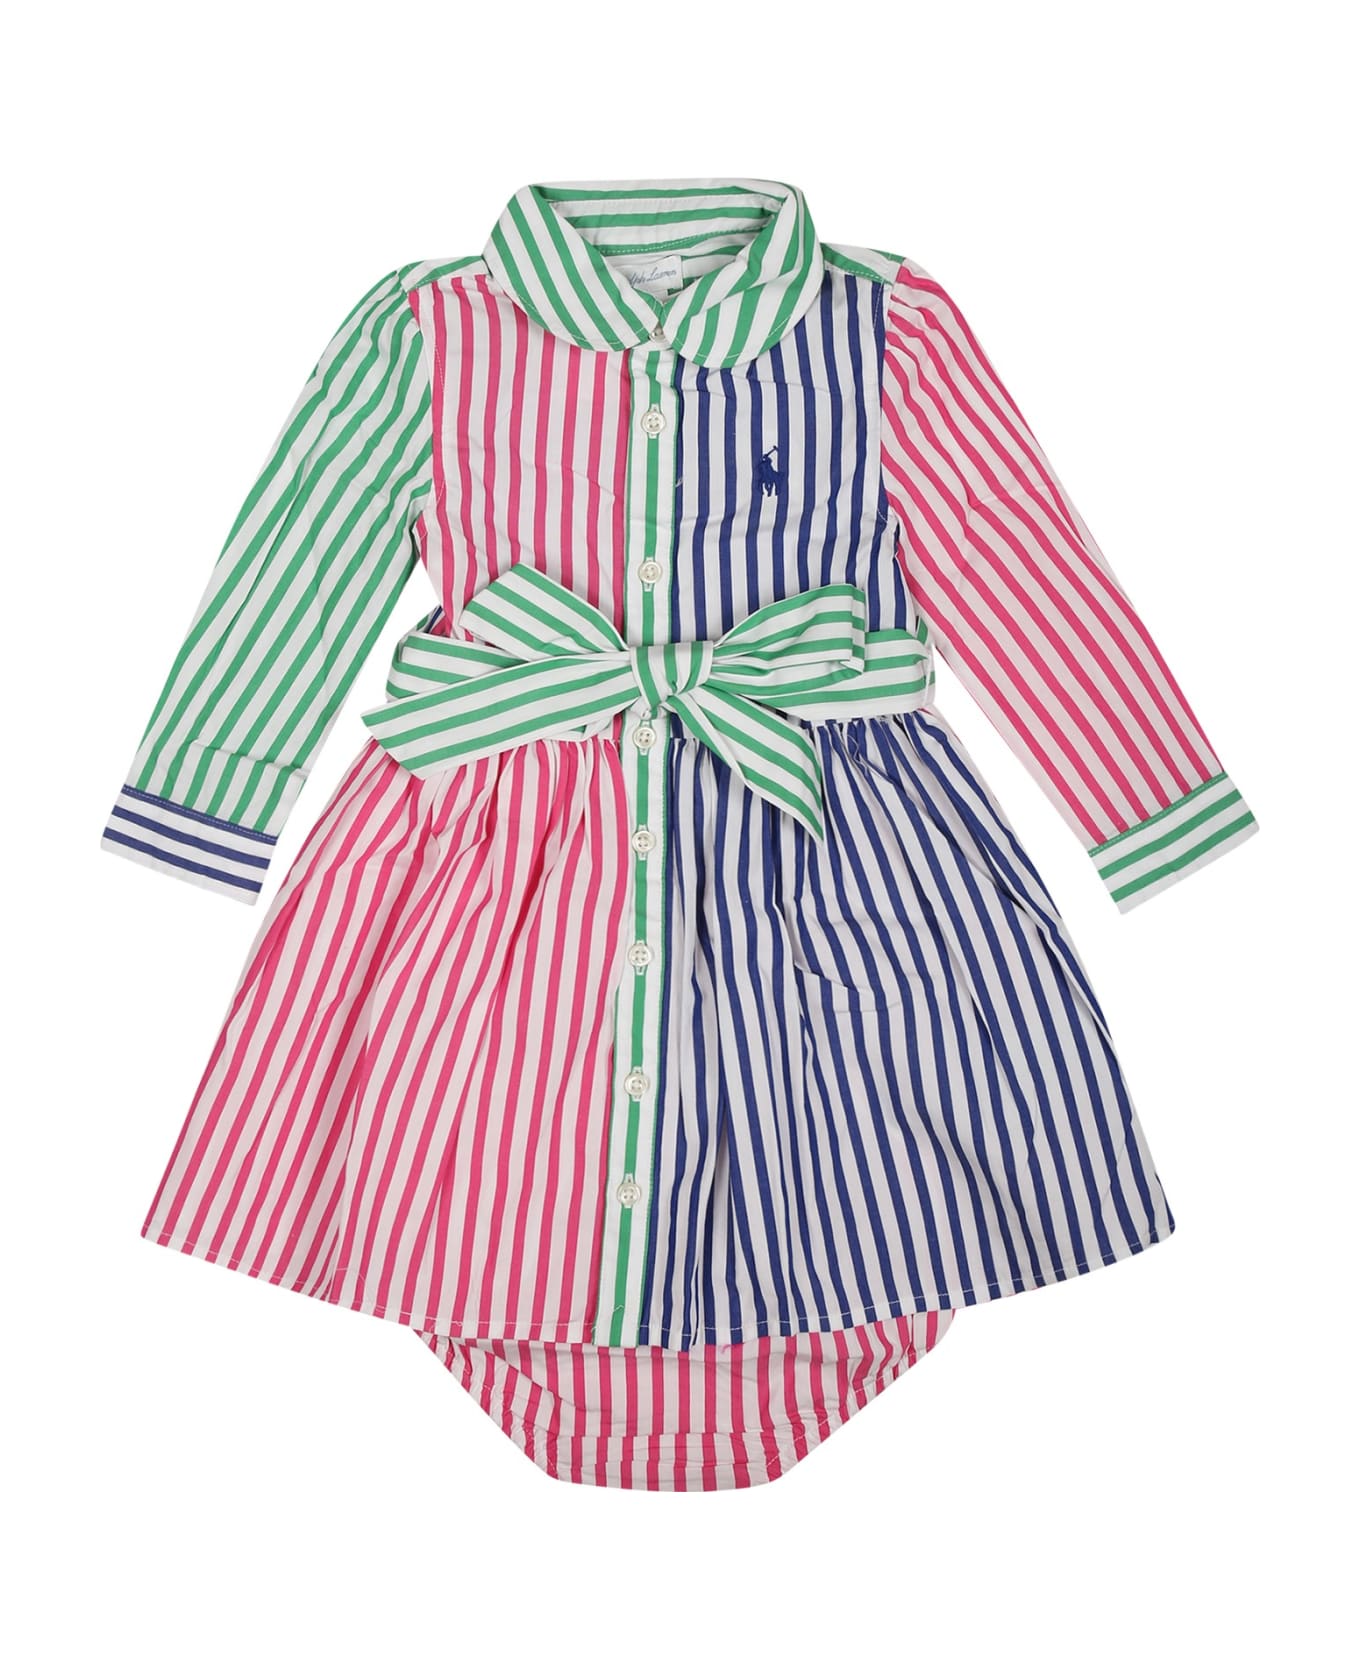 Ralph Lauren White Dress For Baby Girl With Pony - Multicolor